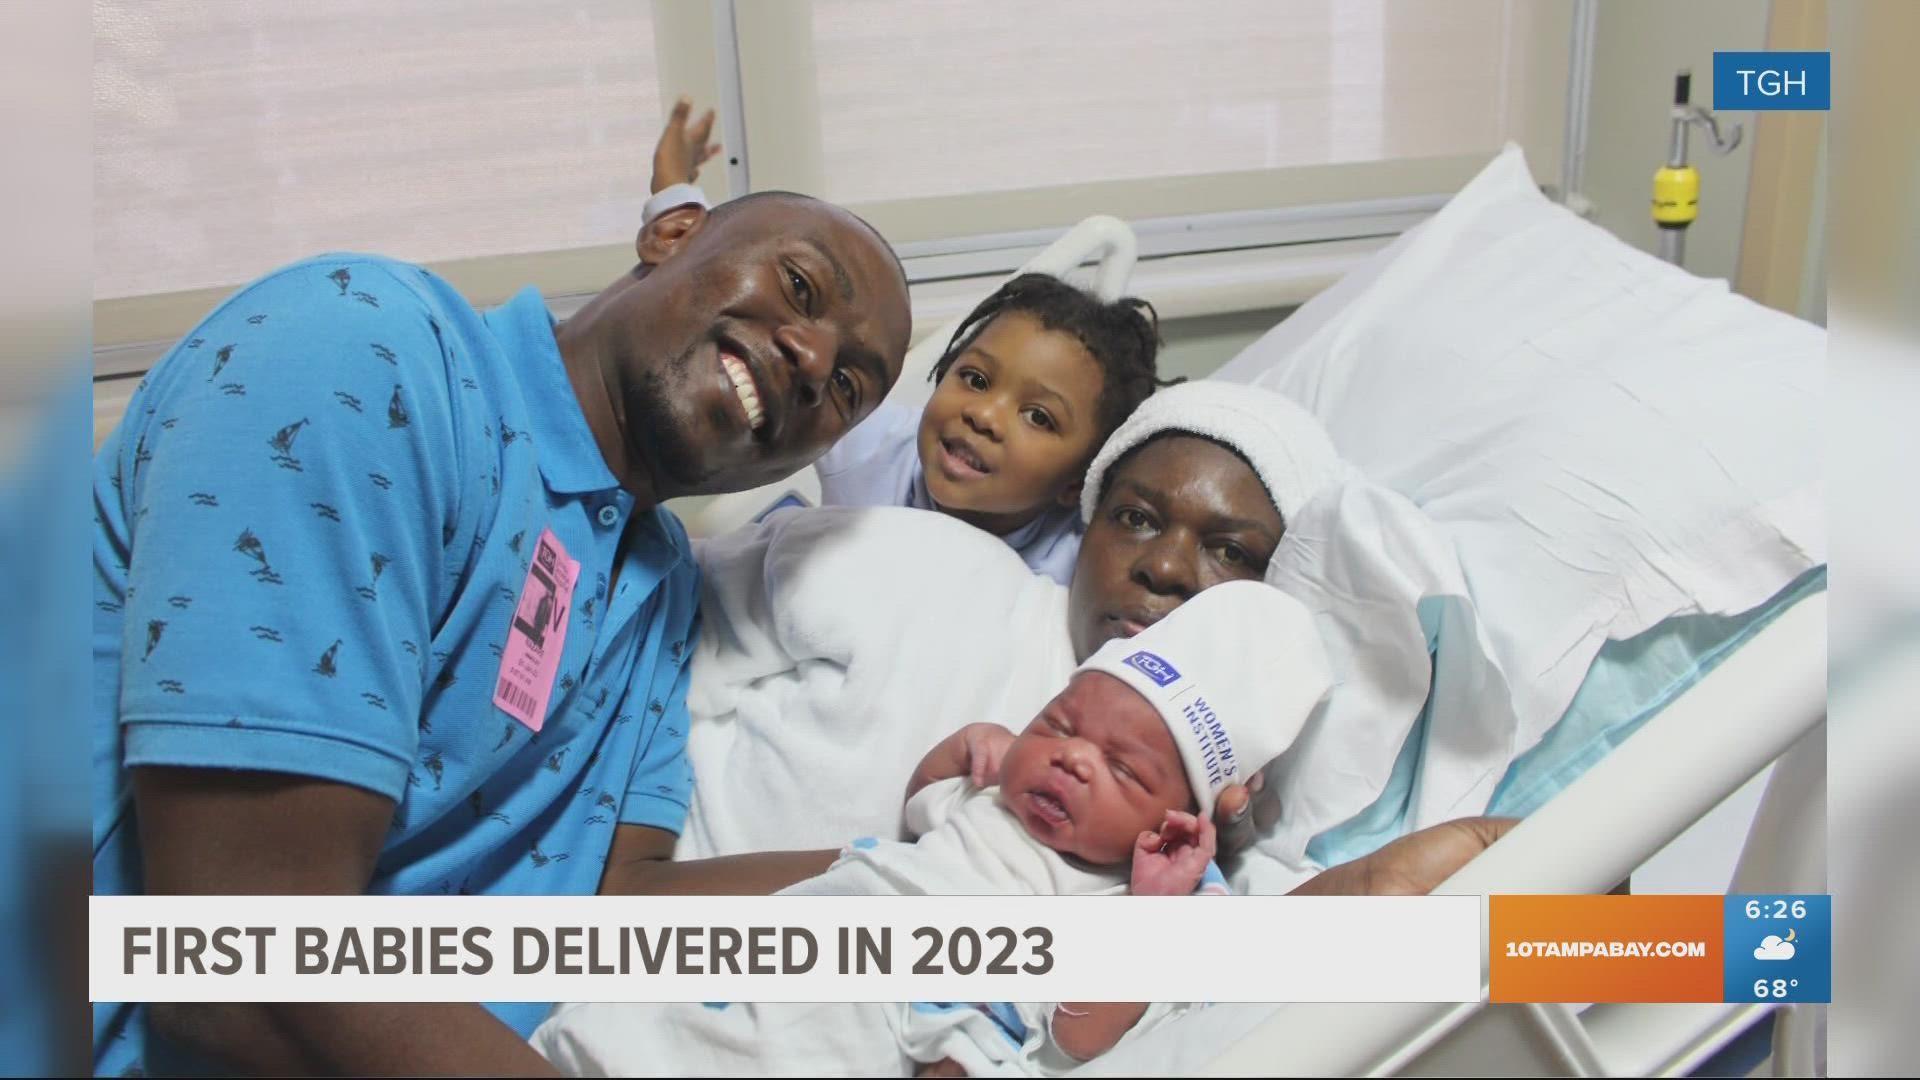 One baby was born in Safety Harbor just one minute into the new year.